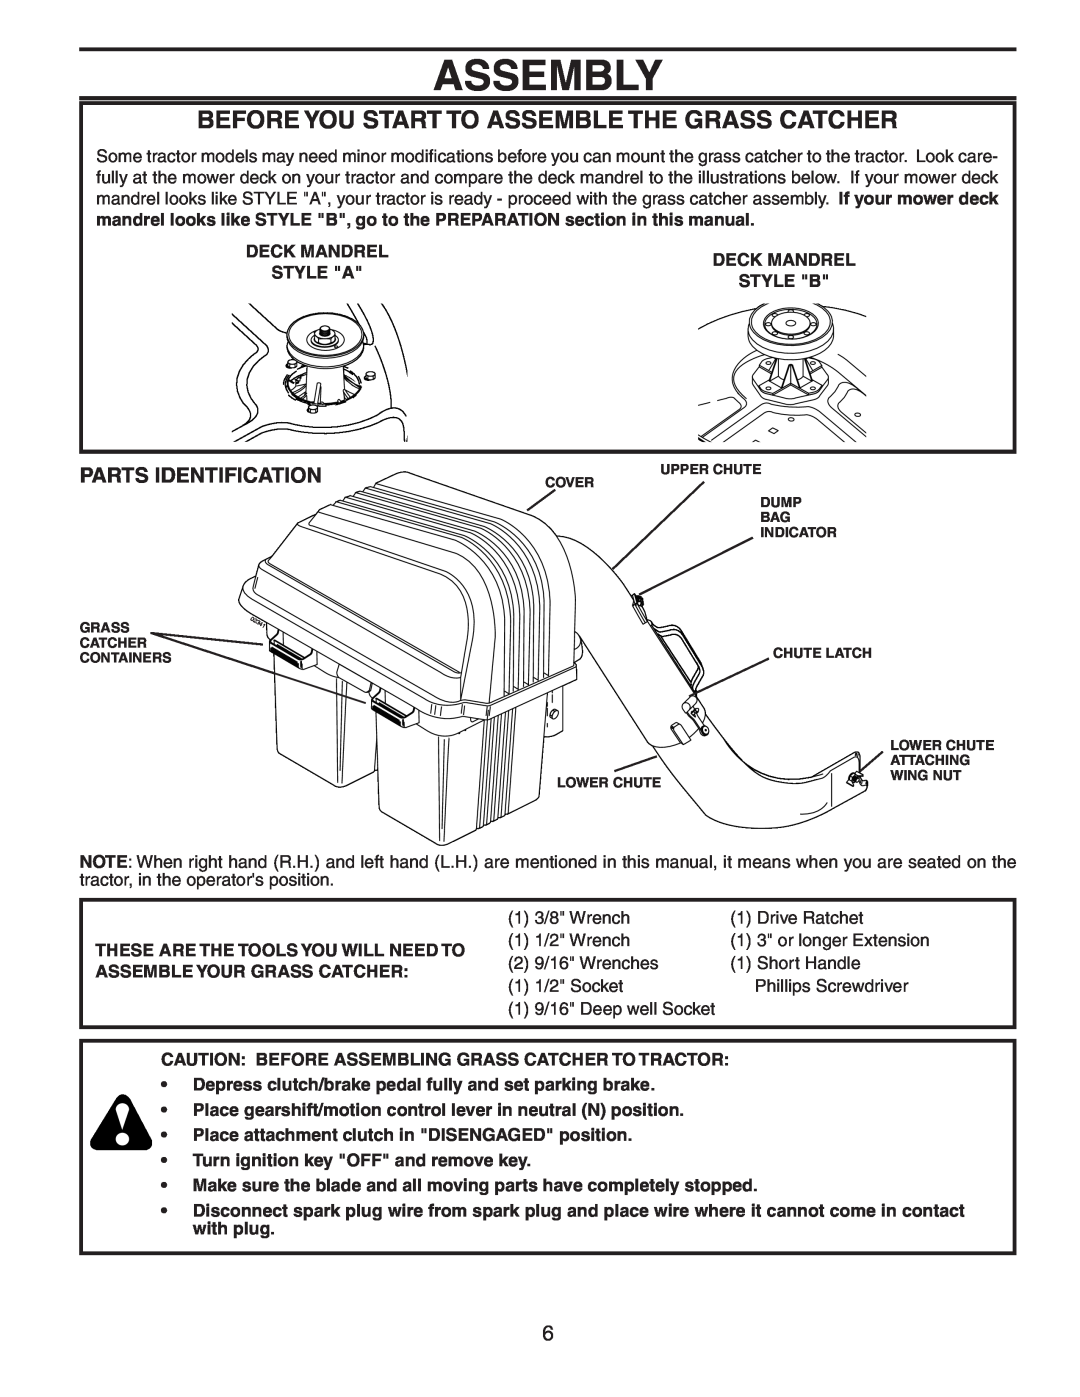 Poulan C38D, 954 14 00-50, 140603 owner manual Assembly, Before You Start To Assemble The Grass Catcher, Parts Identification 